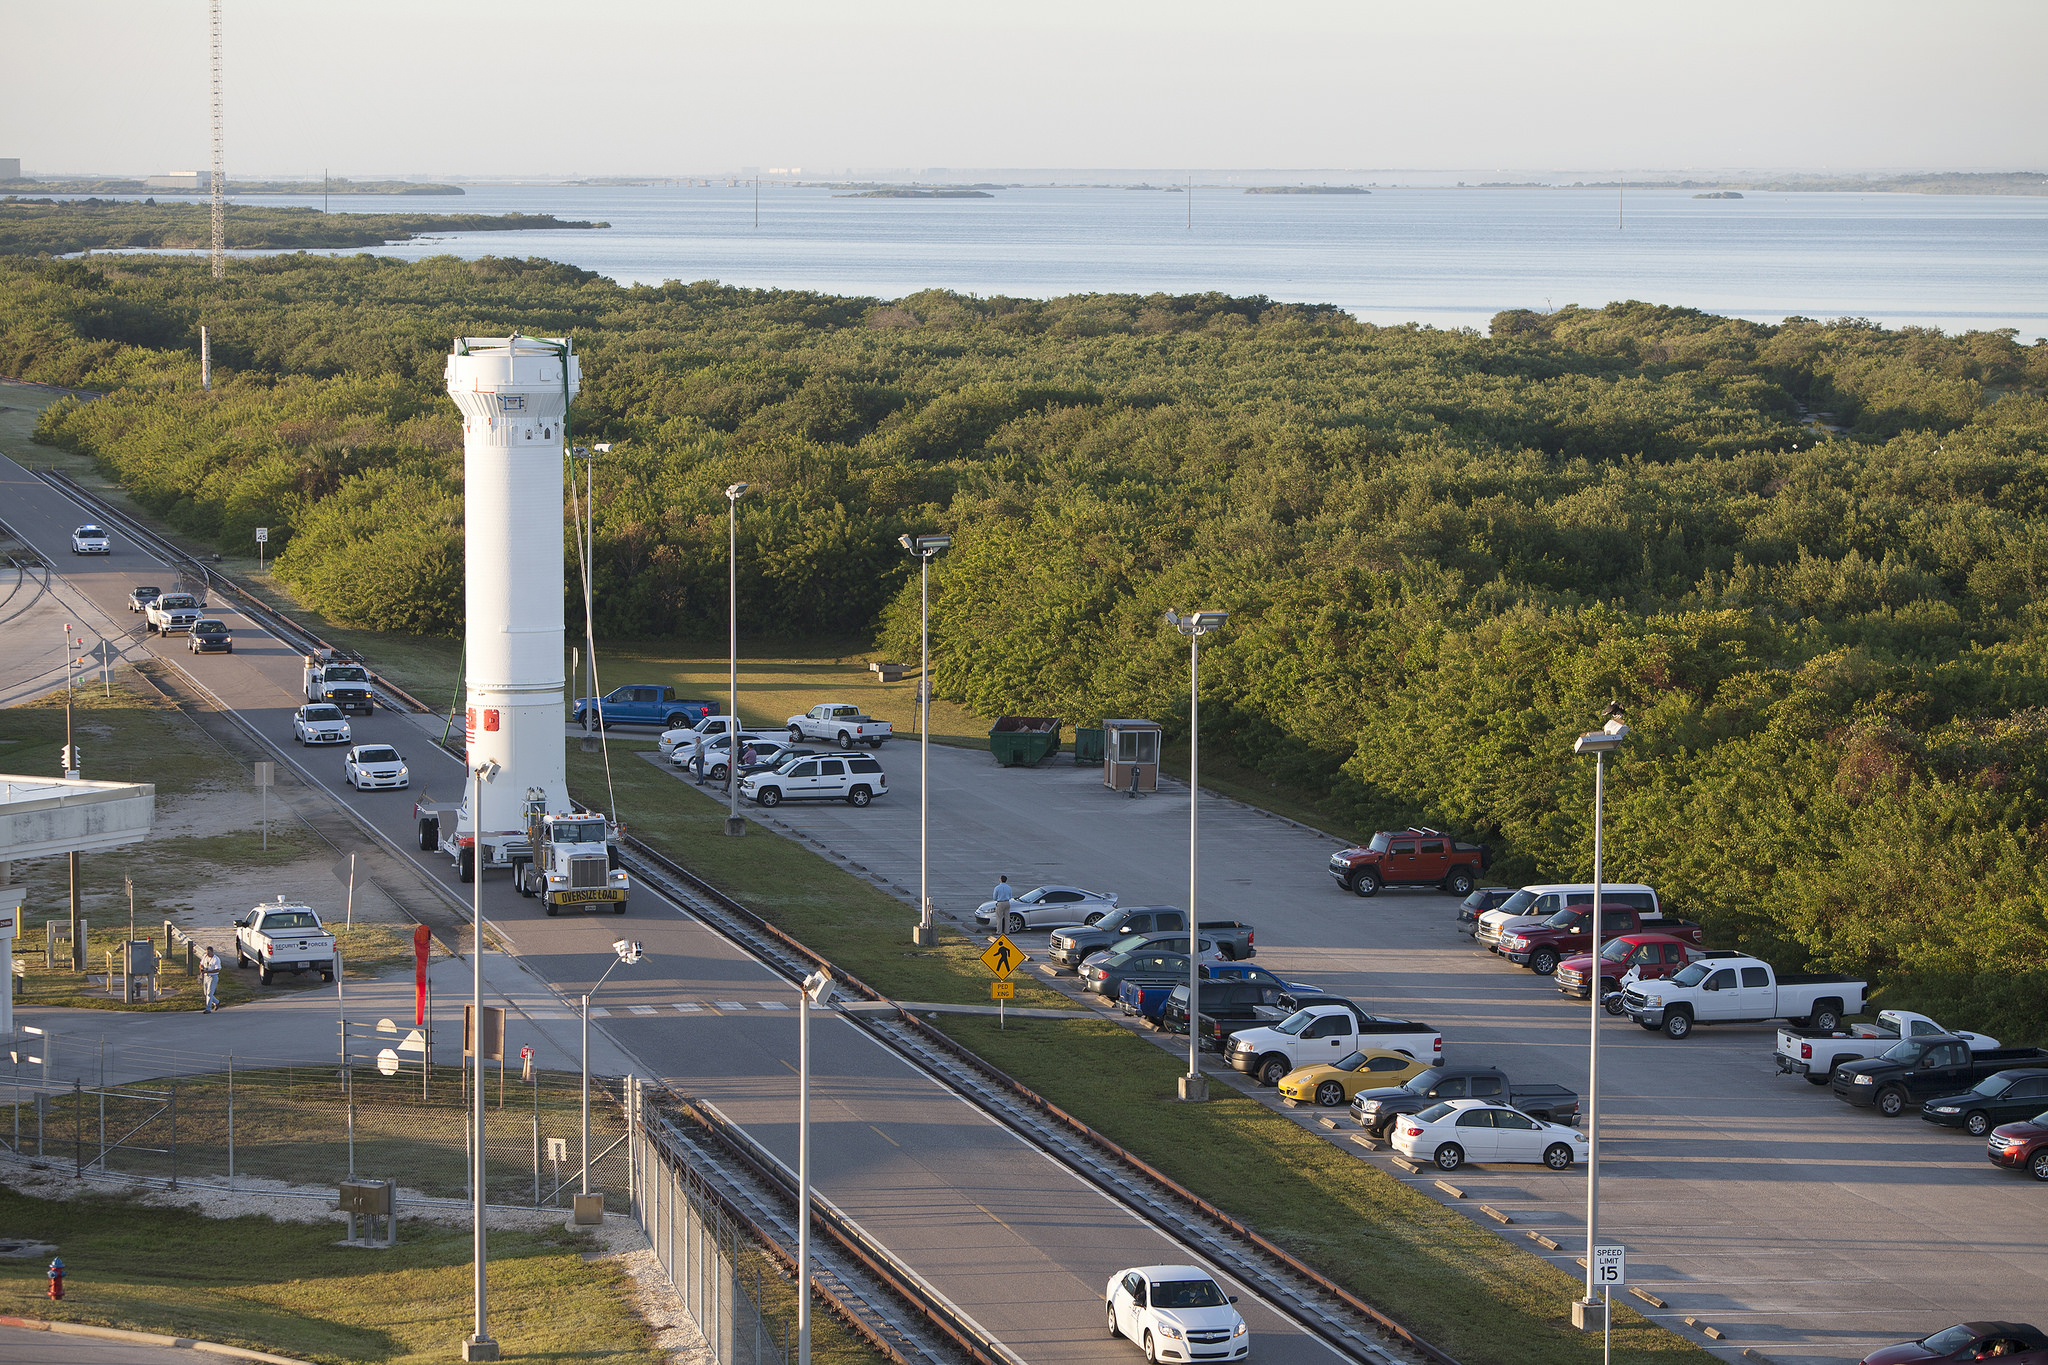 At Cape Canaveral Air Force Station in Florida, a United Launch Alliance (ULA) centaur stage is transported to Launch Complex 41. Along with a ULA Atlas V rocket, it will boost the Orbital ATK Cygnus OA-4 spacecraft on a commercial resupply services mission to the International Space Station. Photo Credit: NASA / Dimitrios Gerondidakis